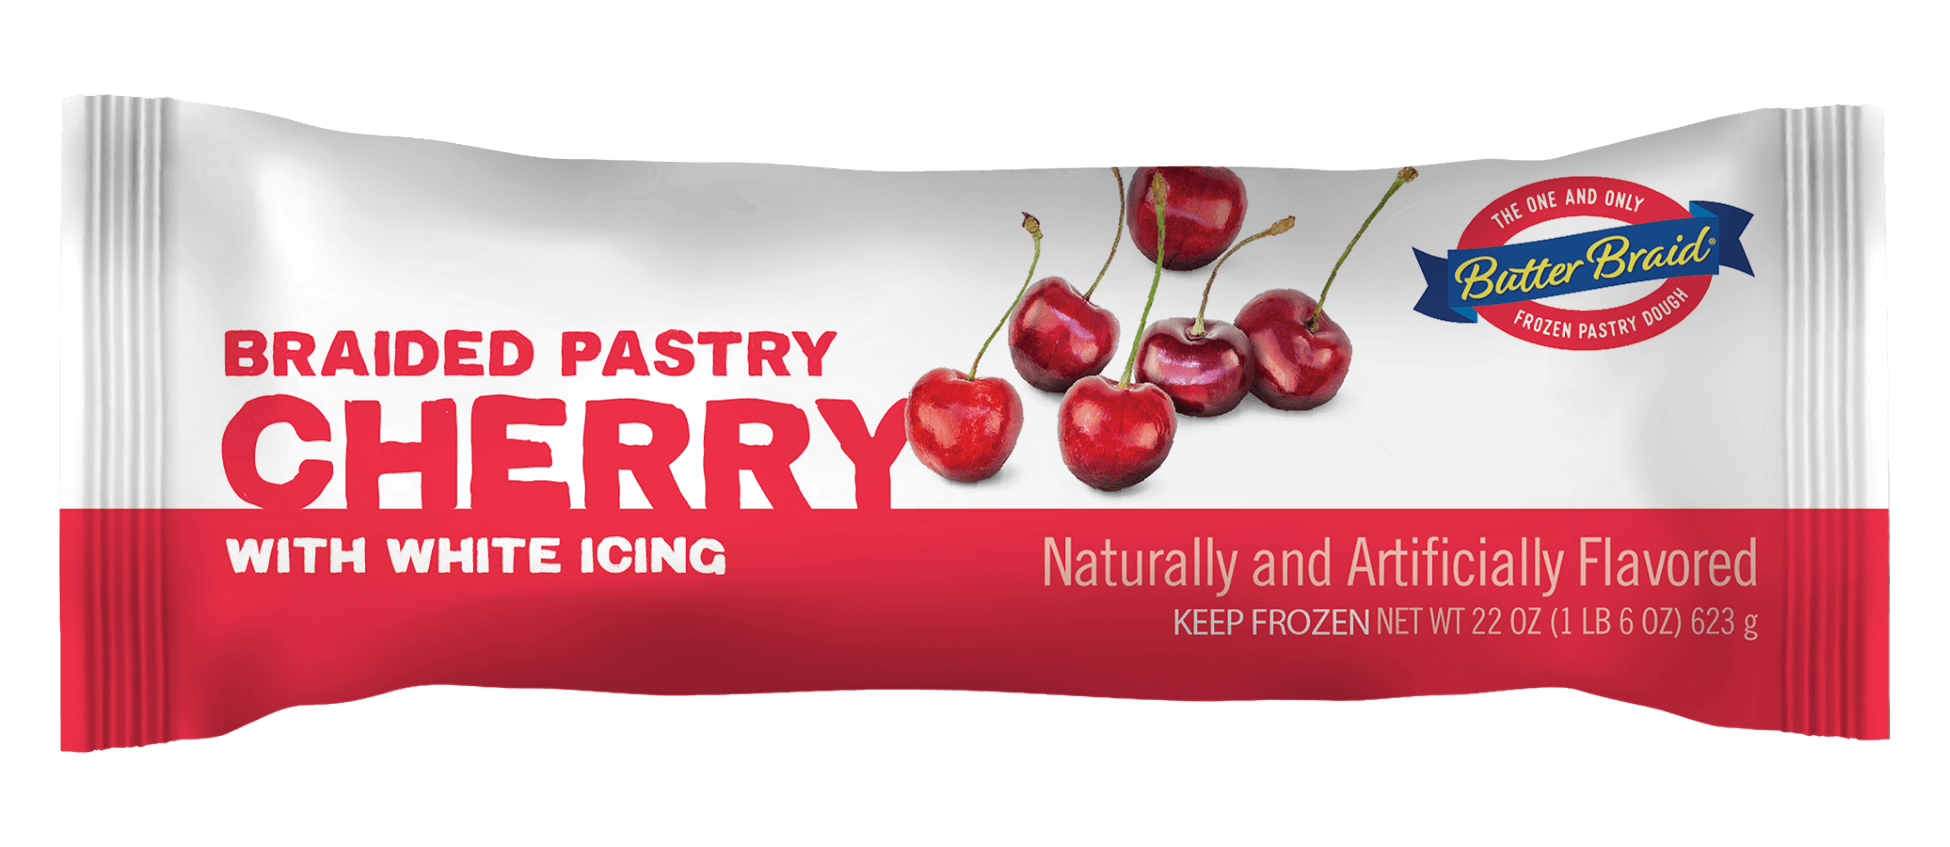 Cherry Pastry packaging